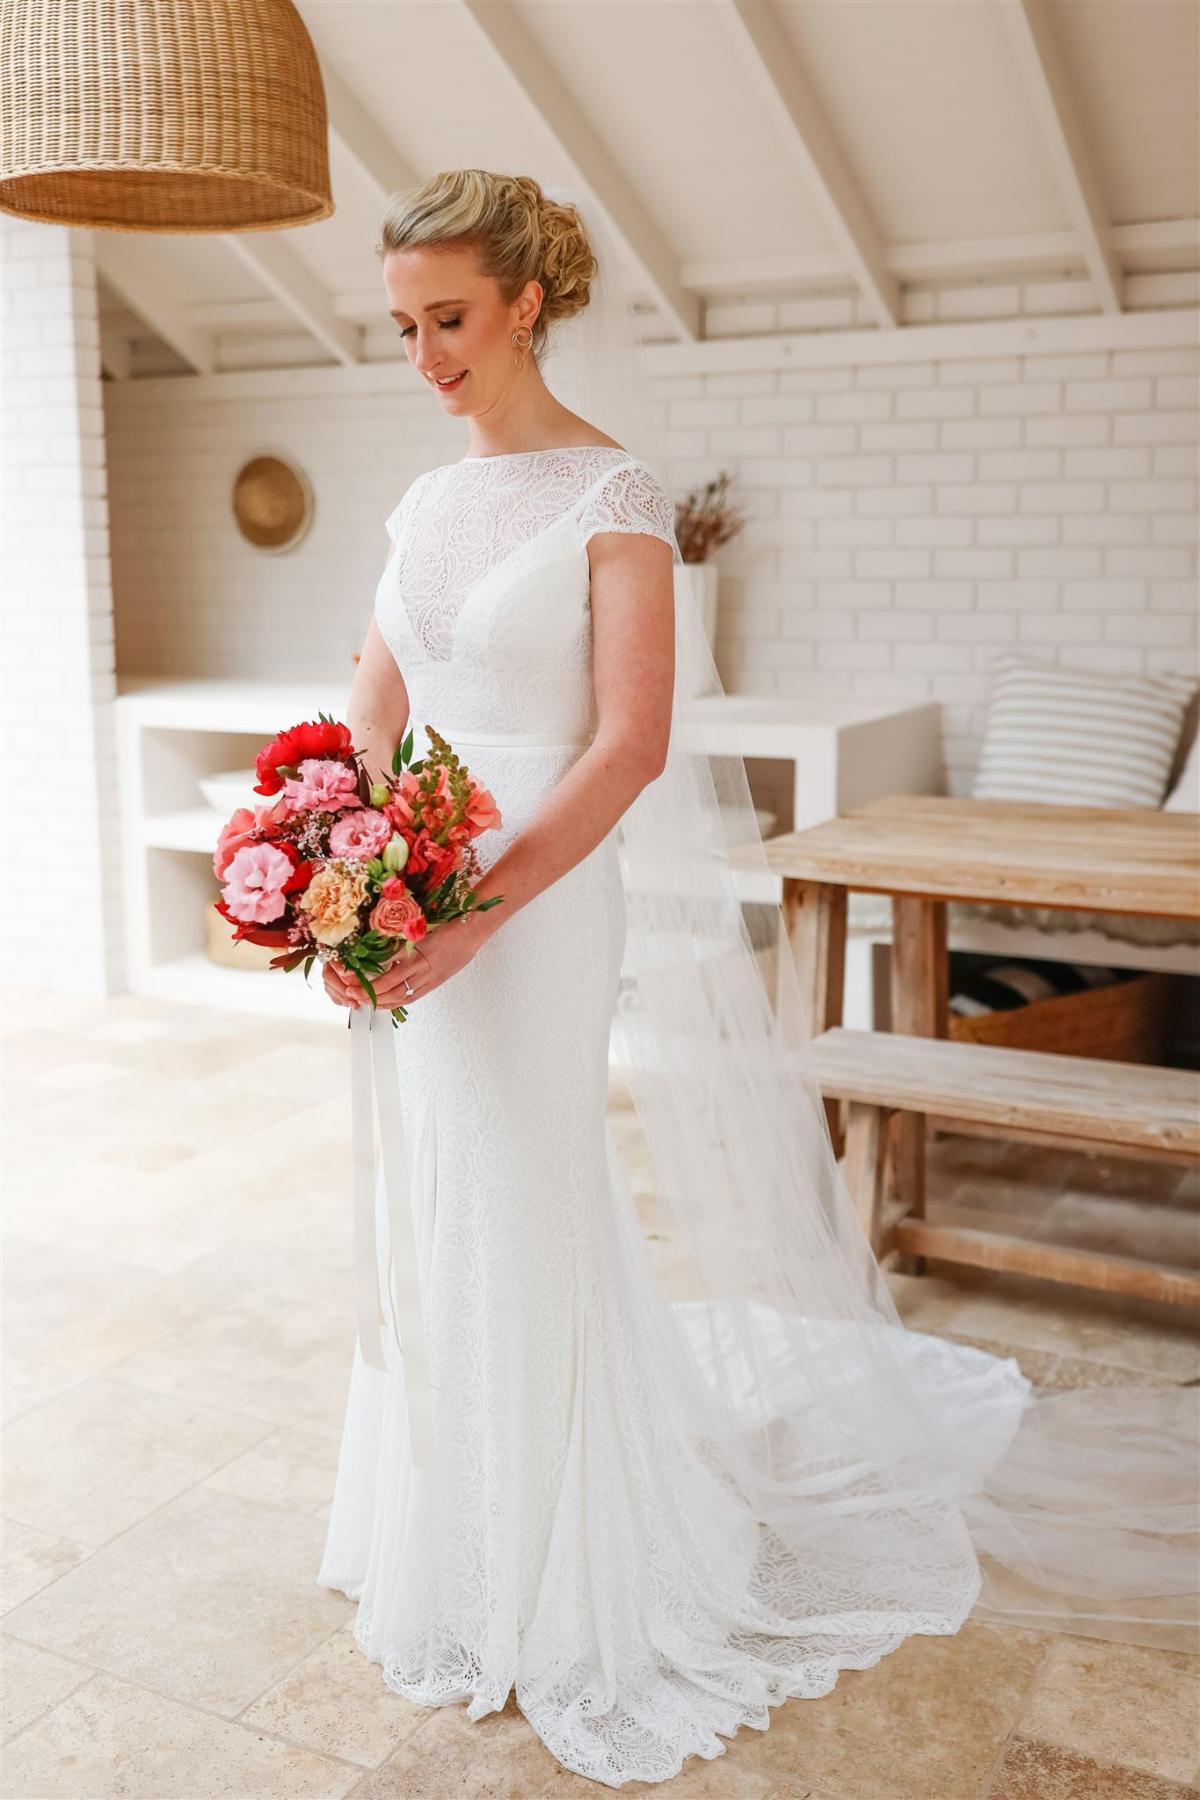 KWH real bride Gemma stands with her bright pink and red bridal bouquet in her Jemma gown, a lace fit and flare high neck wedding dress.